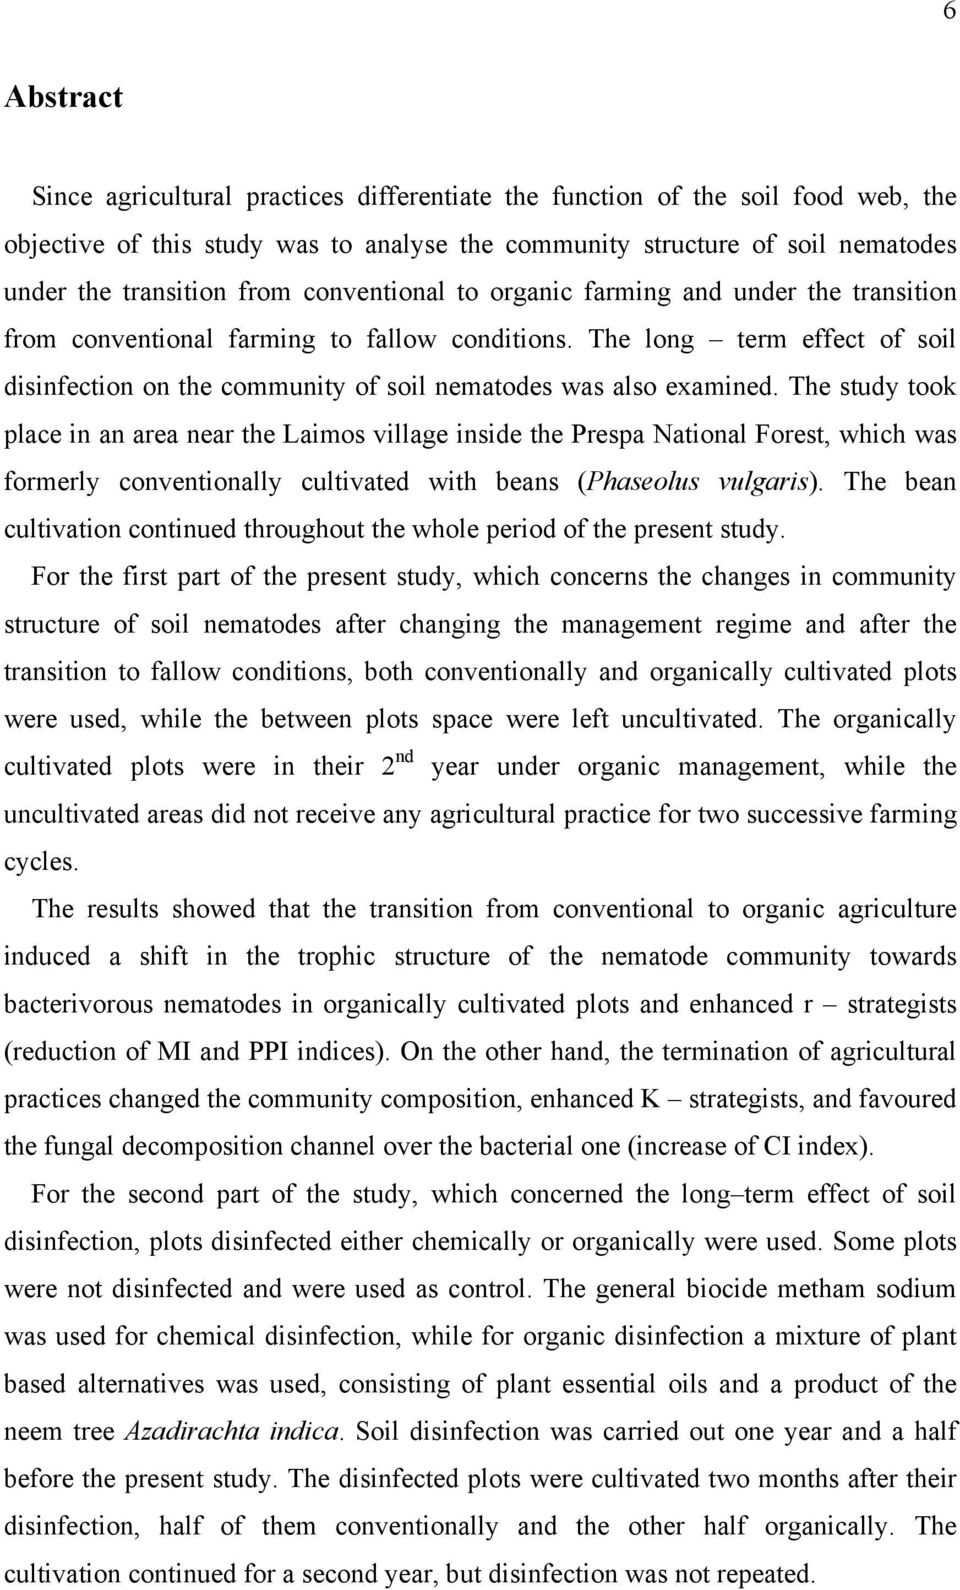 The study took place in an area near the Laimos village inside the Prespa National Forest, which was formerly conventionally cultivated with beans (Phaseolus vulgaris).